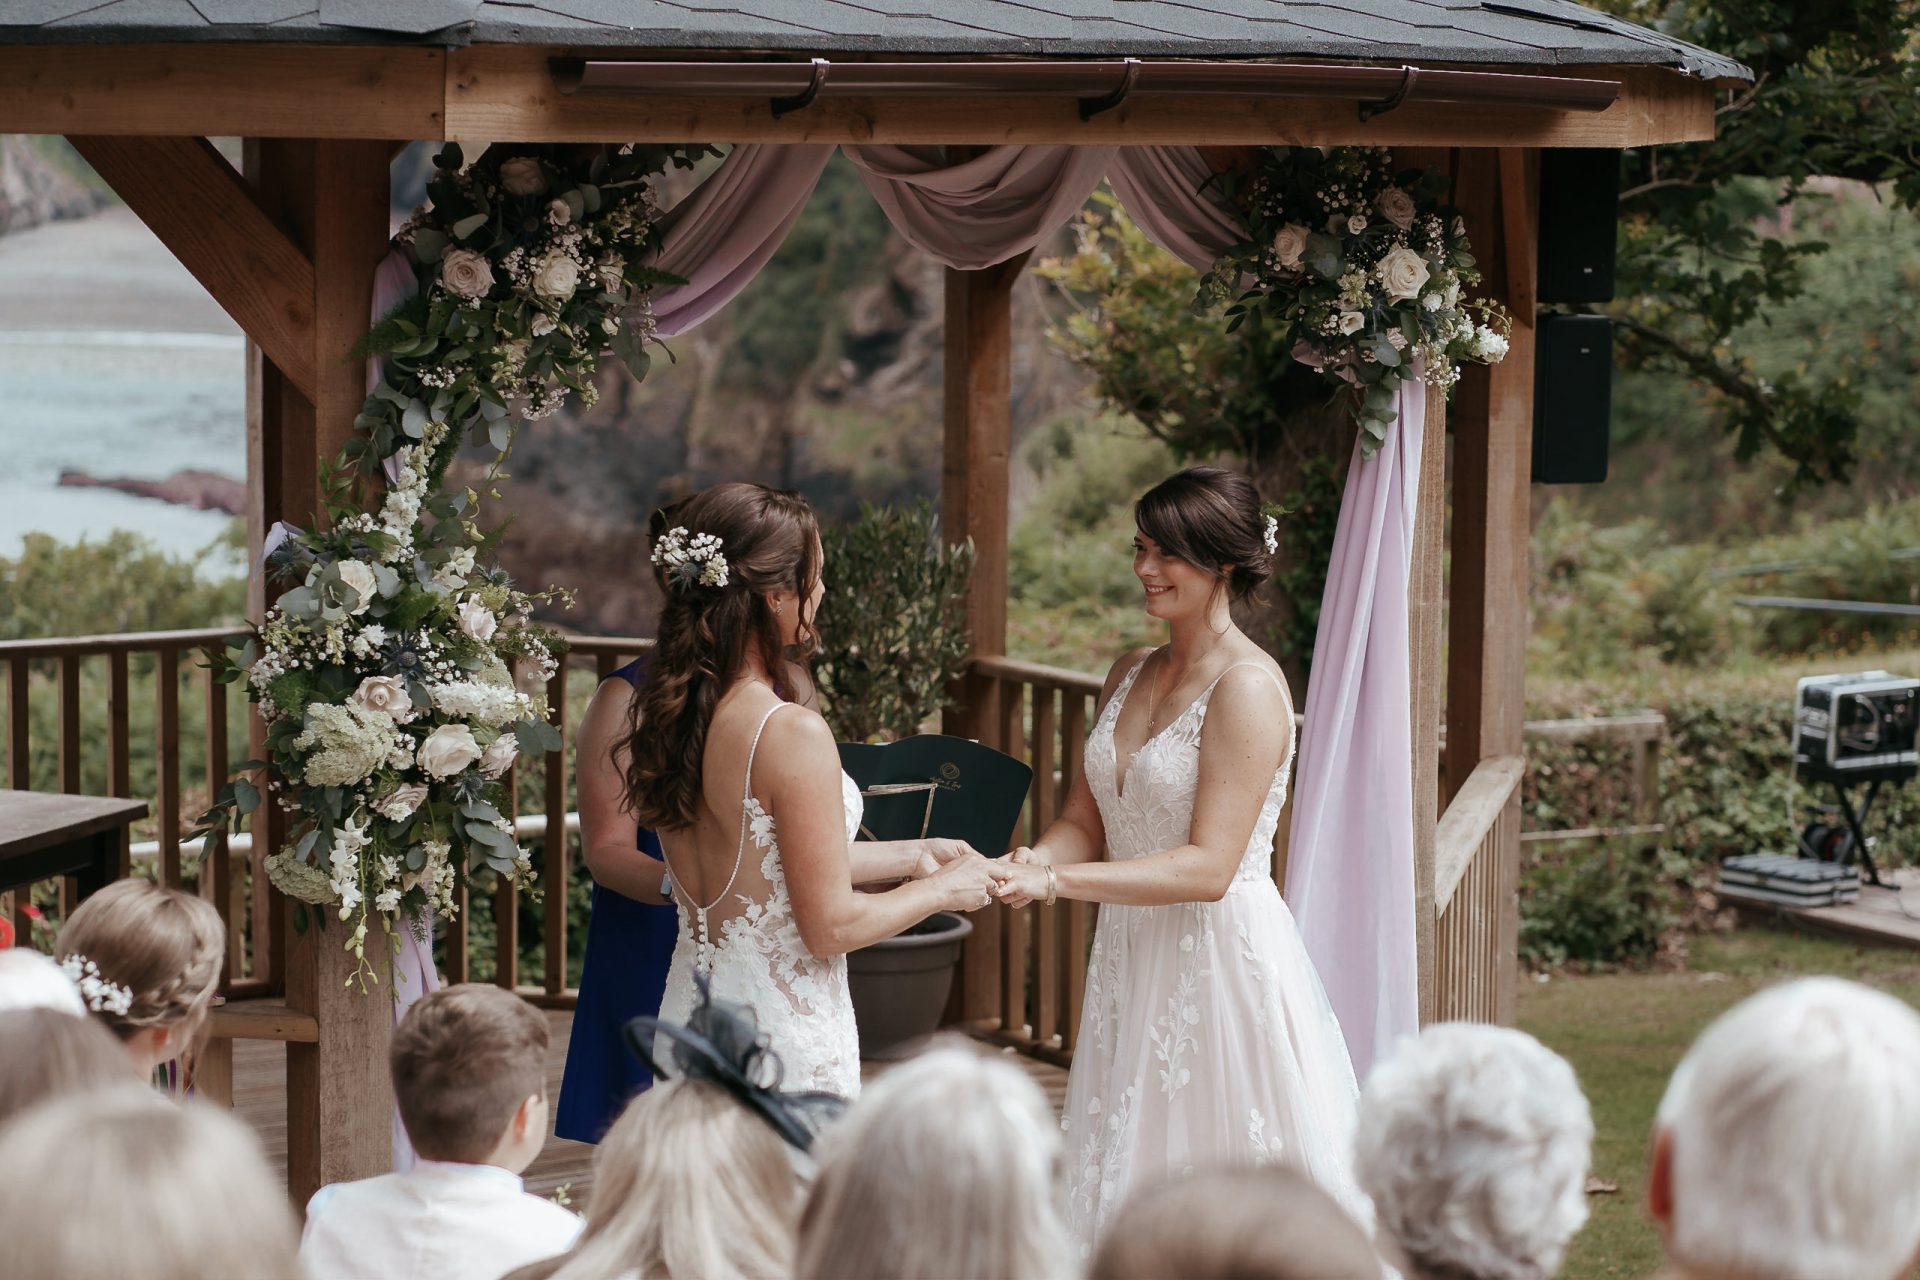 Two brides exchanging vows in front of a gazebo.